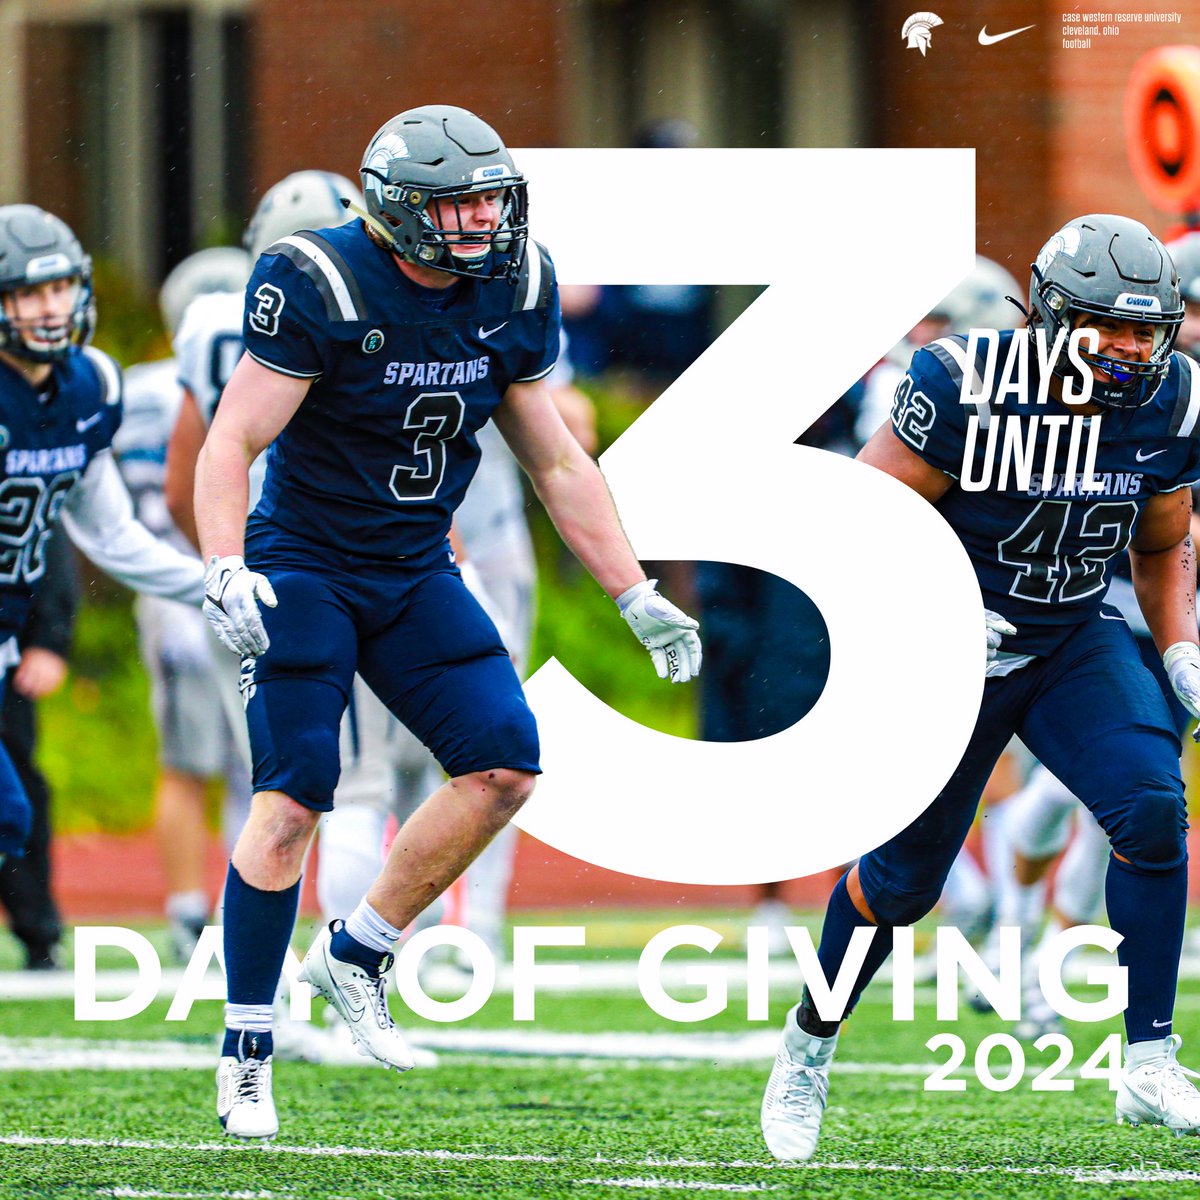 𝟑 𝐝𝐚𝐲𝐬 𝐮𝐧𝐭𝐢𝐥 𝐭𝐡𝐞 𝐃𝐚𝐲 𝐨𝐟 𝐆𝐢𝐯𝐢𝐧𝐠! Funds raised through the Day of Giving will be designated to our Intern Coaching Program. #d3fb #BlueCWRU #RollSpartans